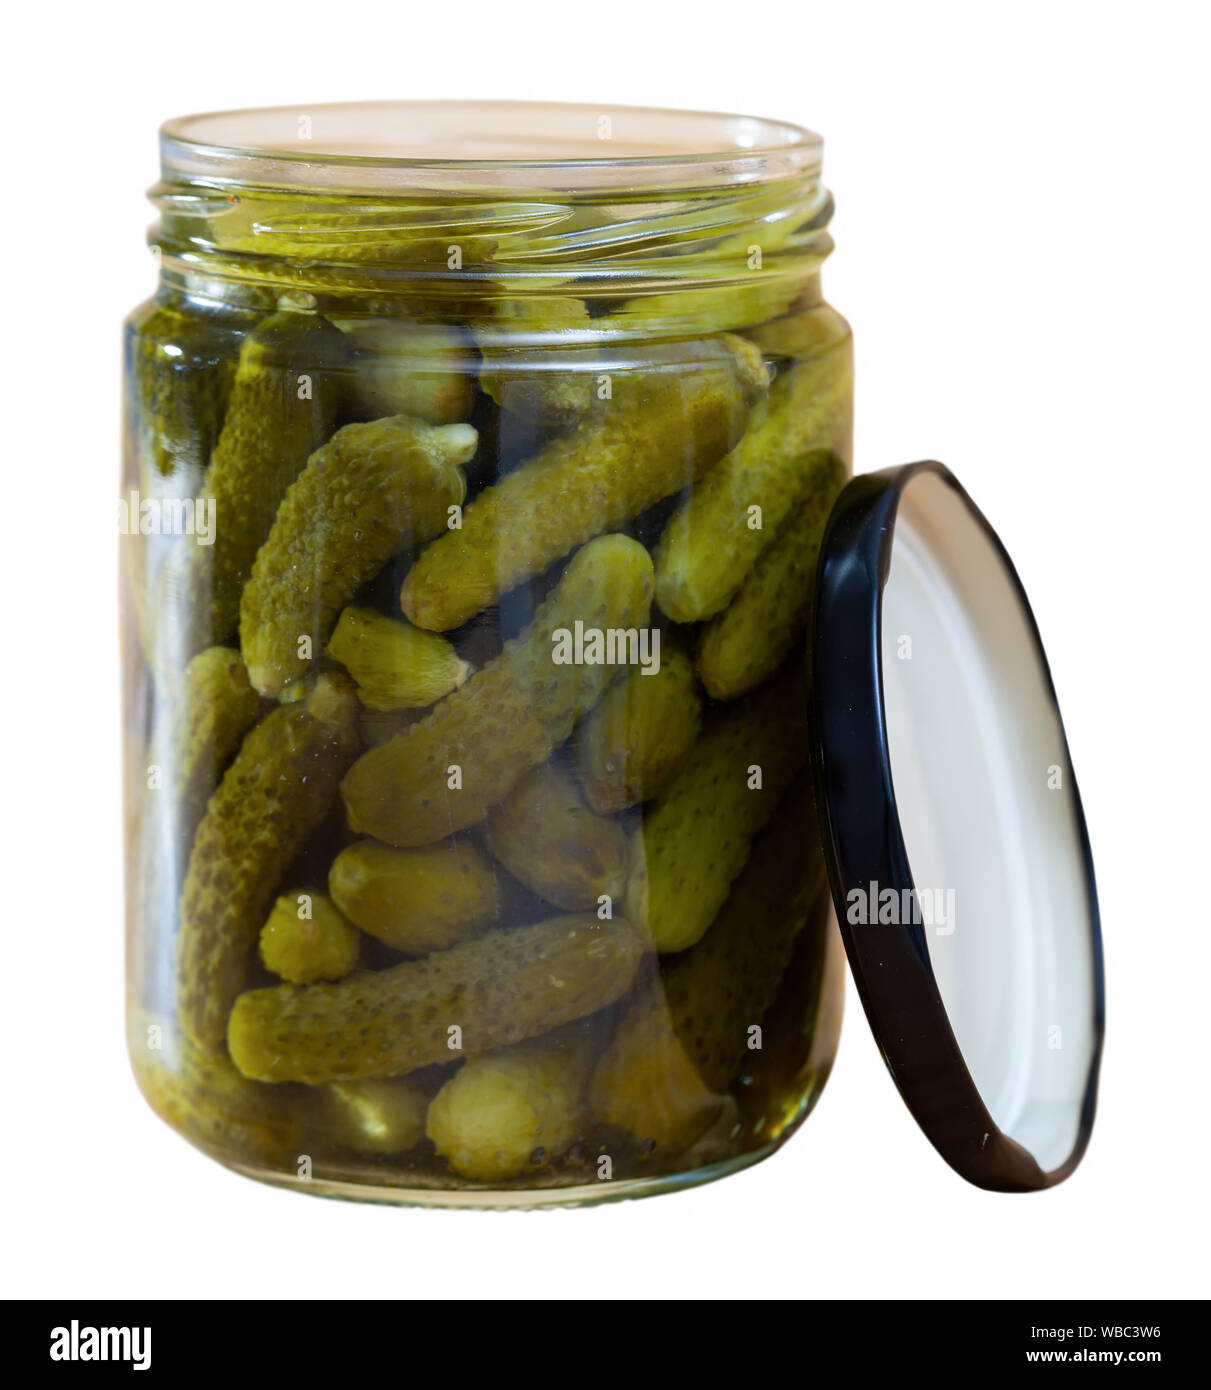 Download Image Of Opened Glass Jar With Pickled Cucumbers Isolated Over White Background Stock Photo Alamy Yellowimages Mockups